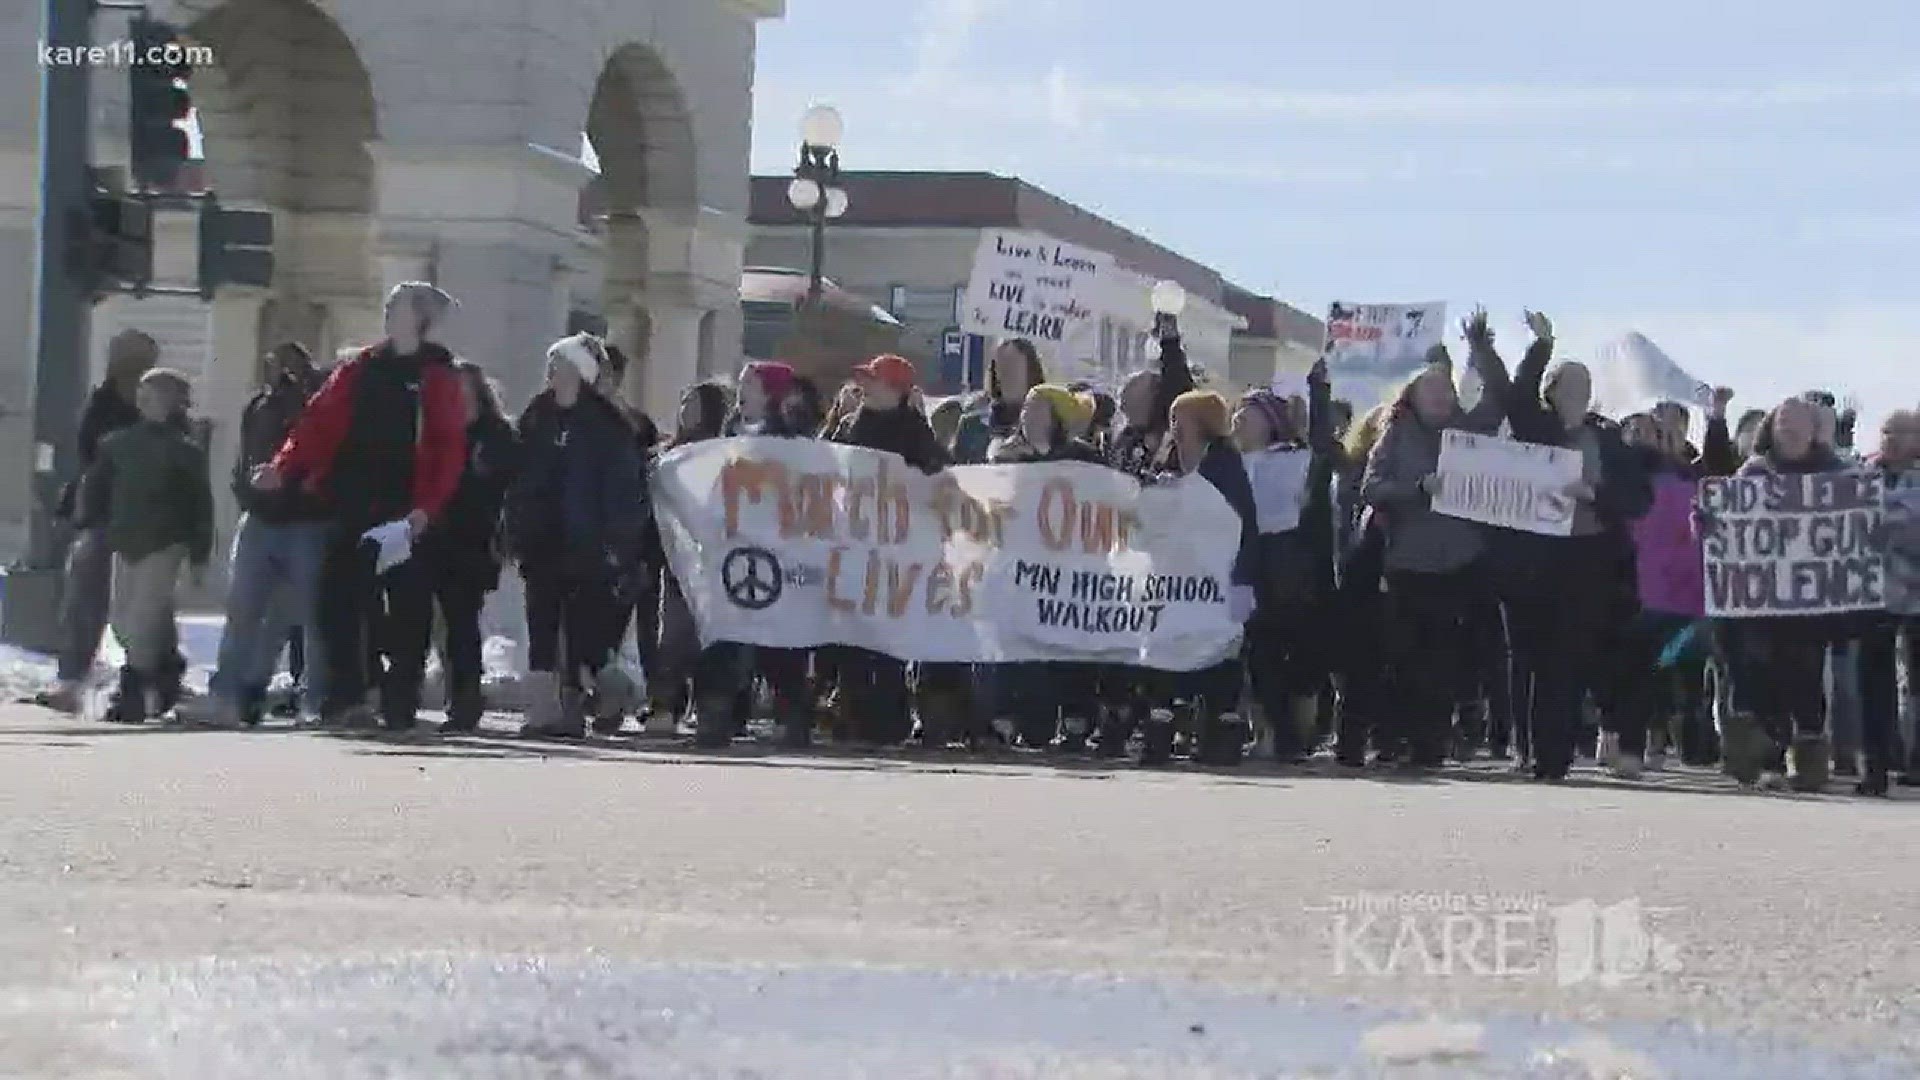 St. Paul police estimate 2,000 students from around the metro area marched to the Capitol on Wednesday, and more than 5,000 people rallied on the steps. http://kare11.tv/2D65wZn